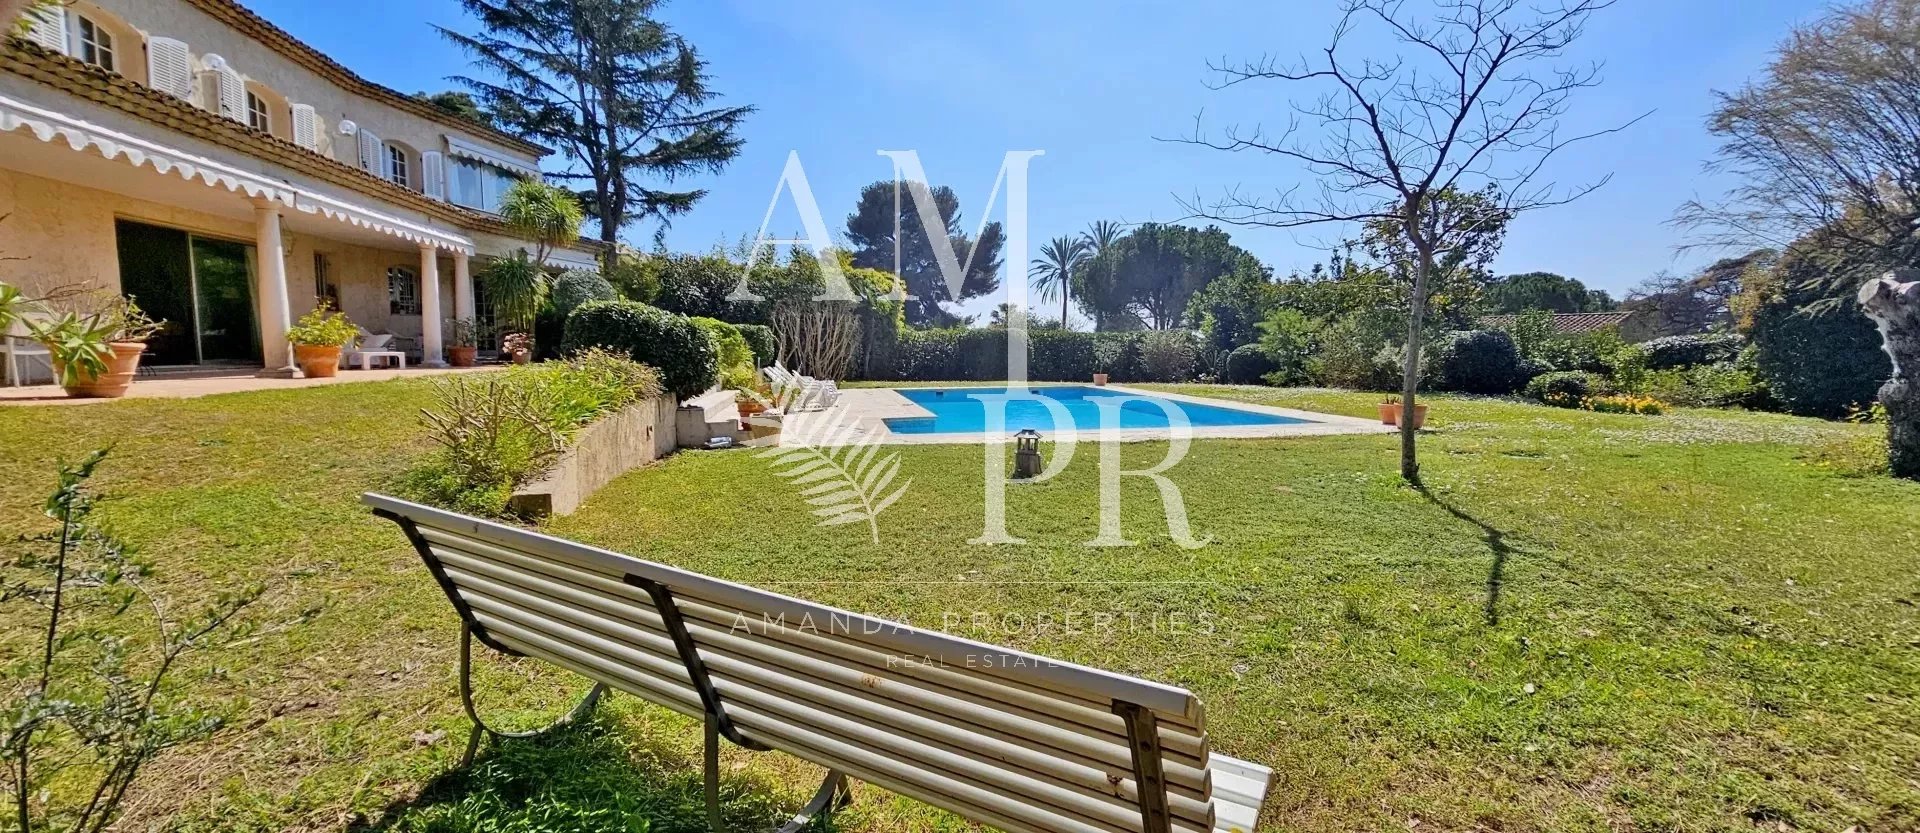 Antibes Large Provencal Villa with Swimming Pool